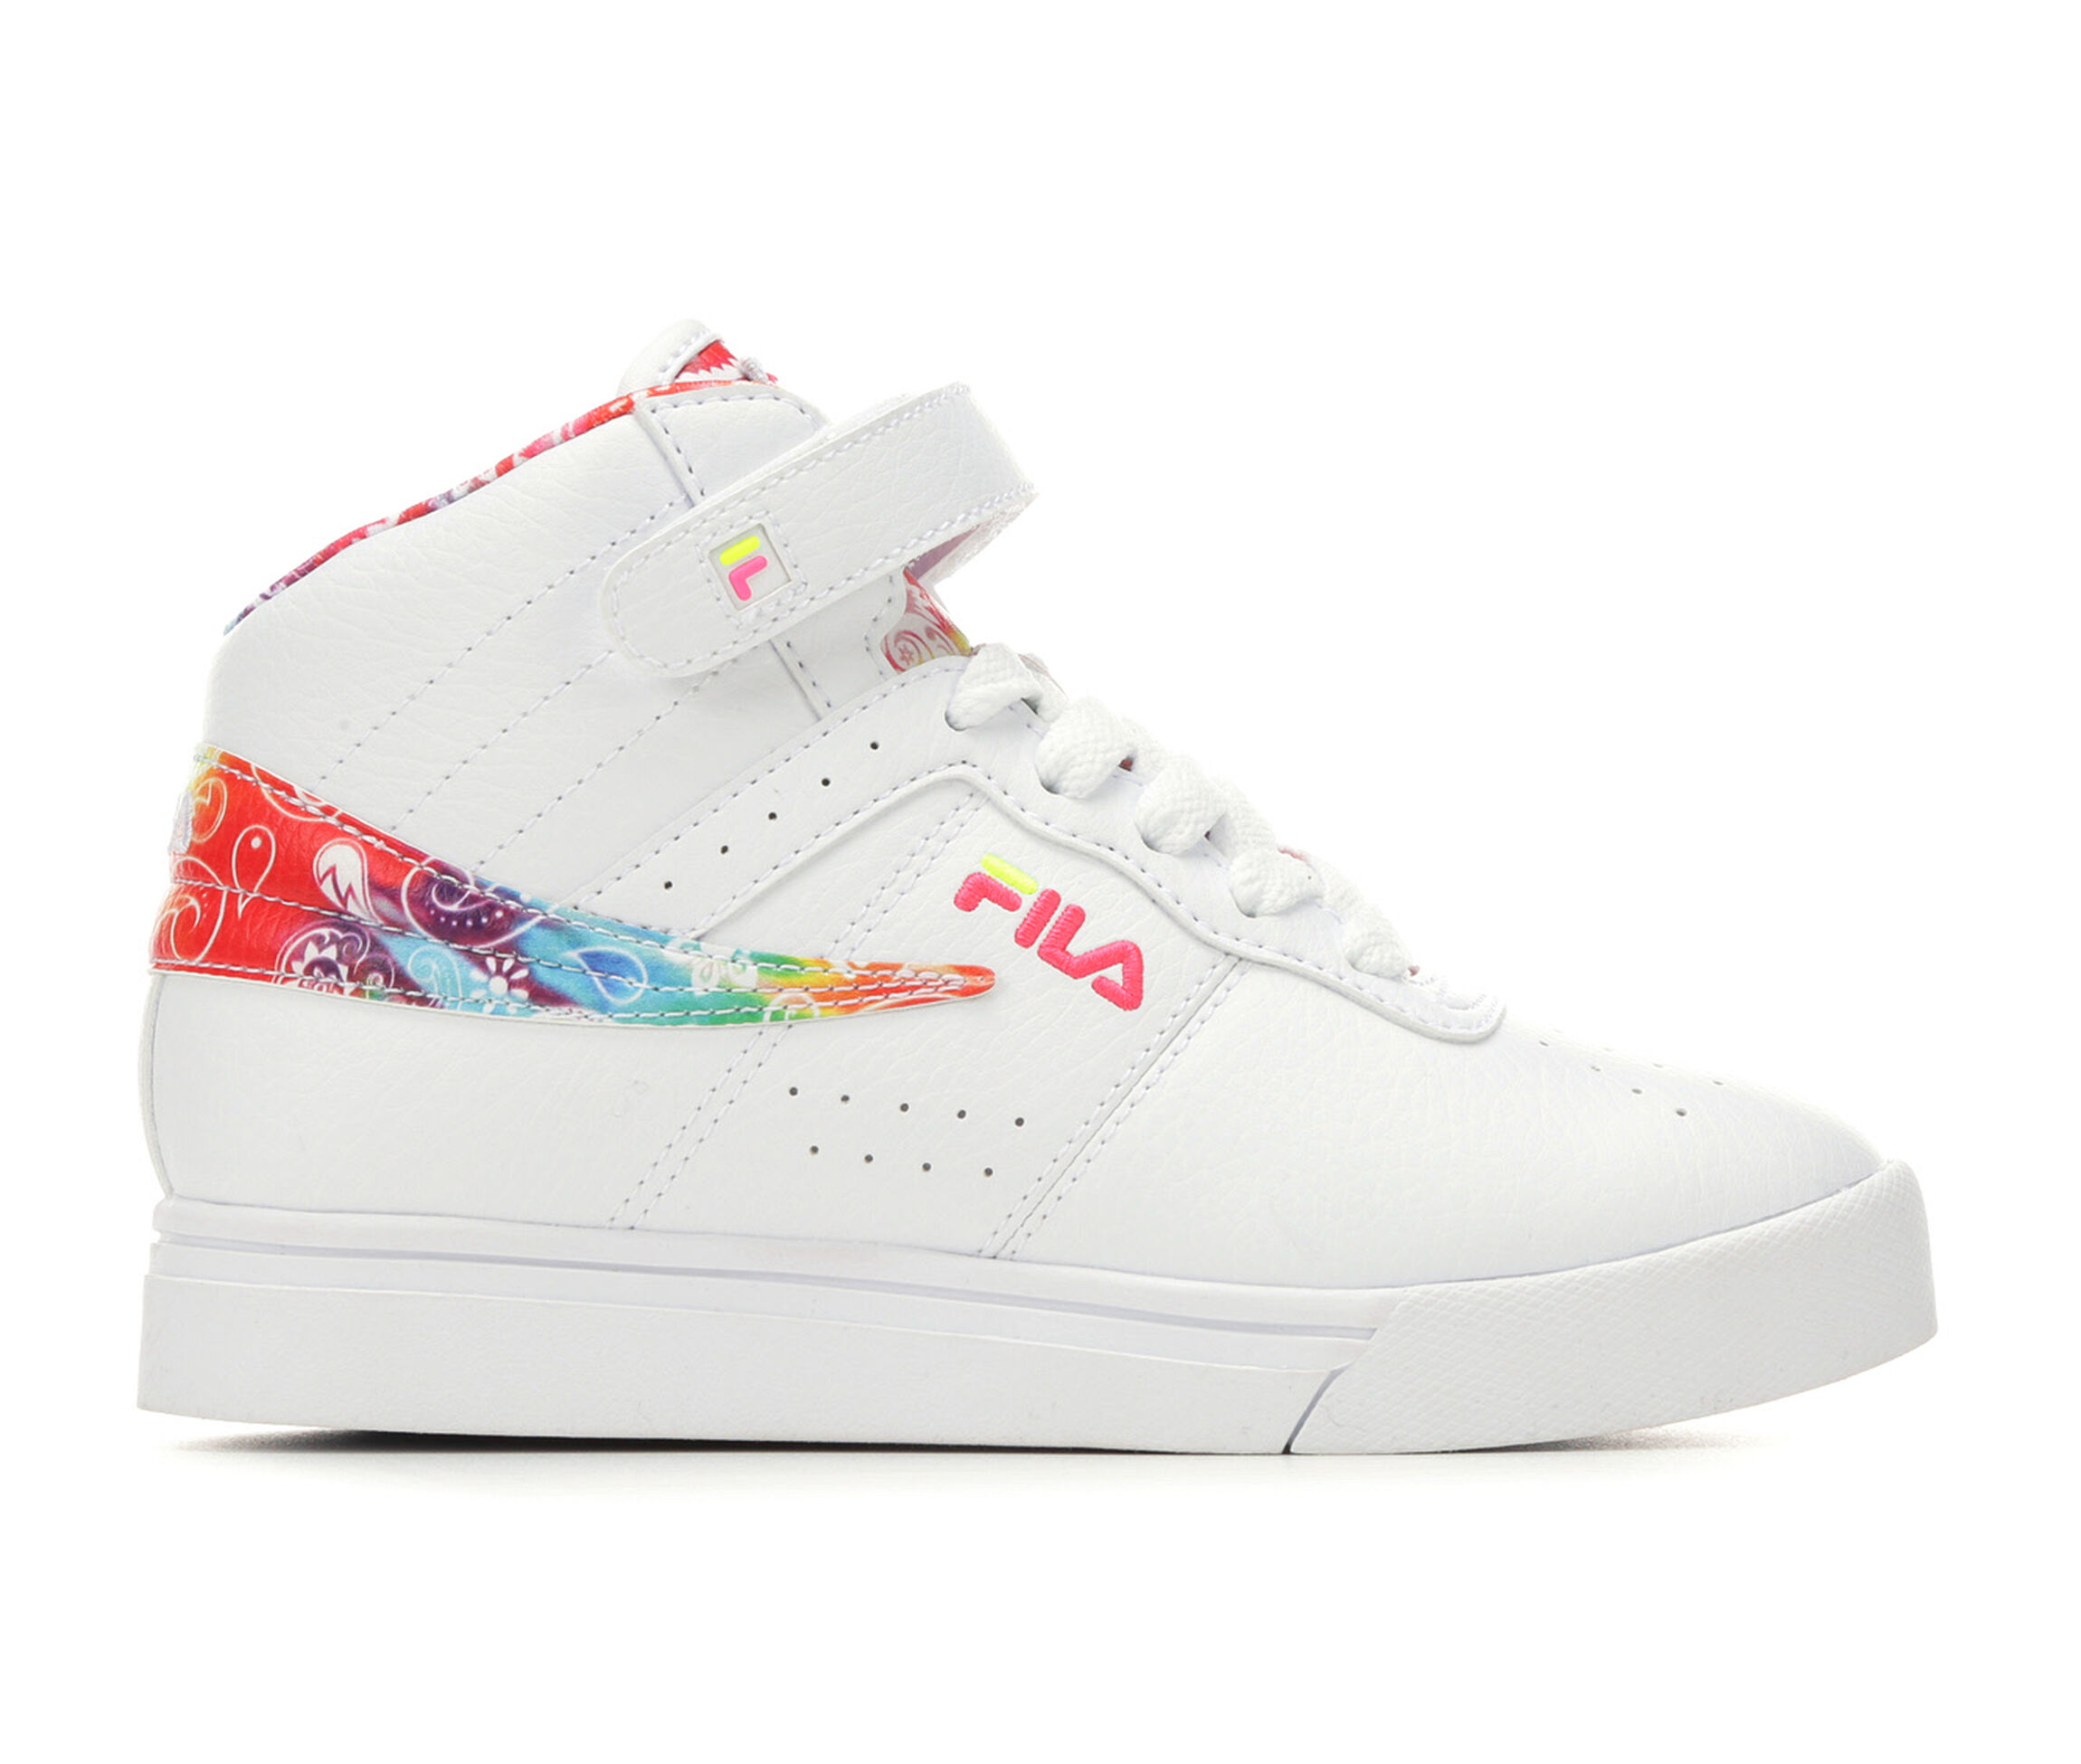 FILA Shoes, Sneakers & Accessories | Shoe Carnival